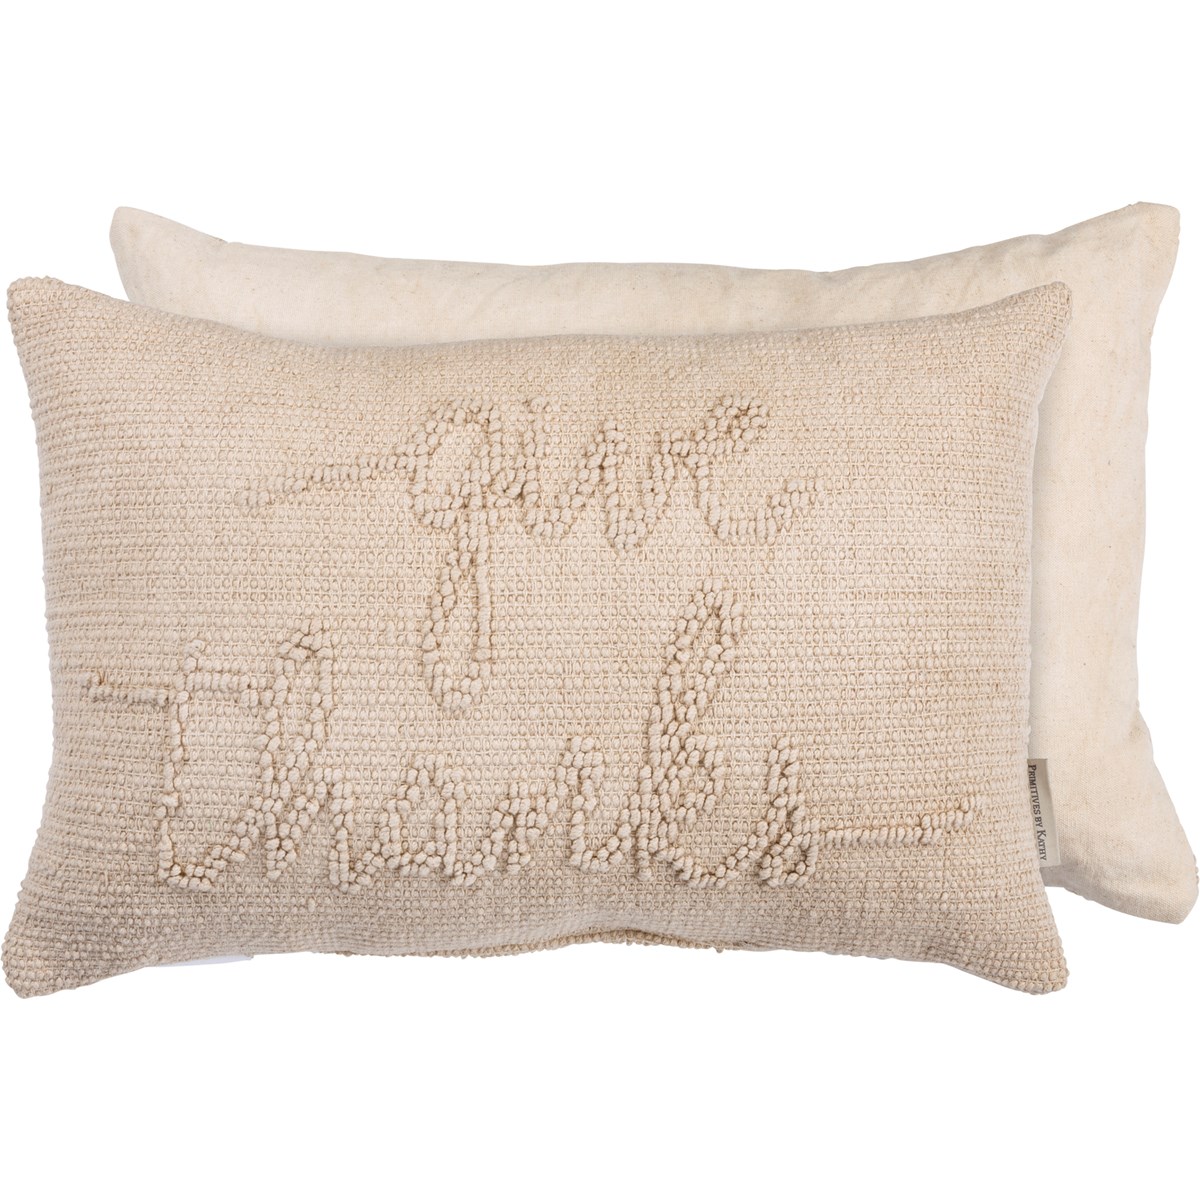 Give Thanks Knobby Pillow - Cotton, Canvas, Zipper